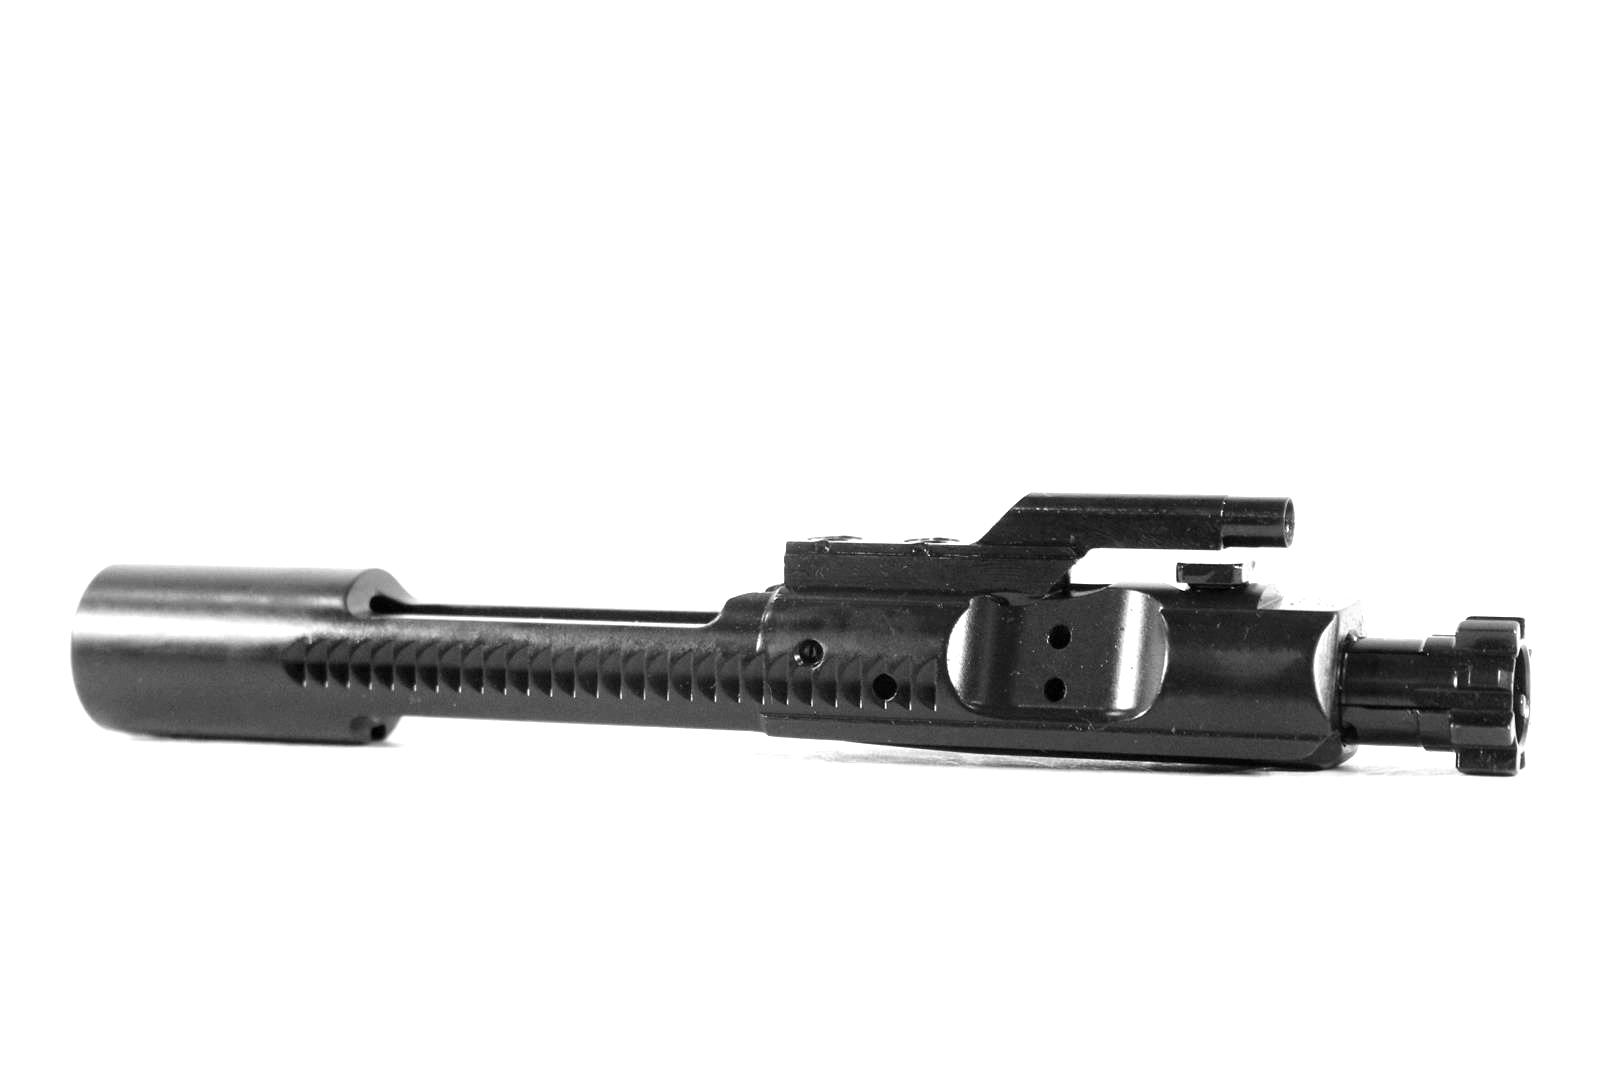 Pro2a Tactical 7.62x39 Nitride Bolt Carrier Group